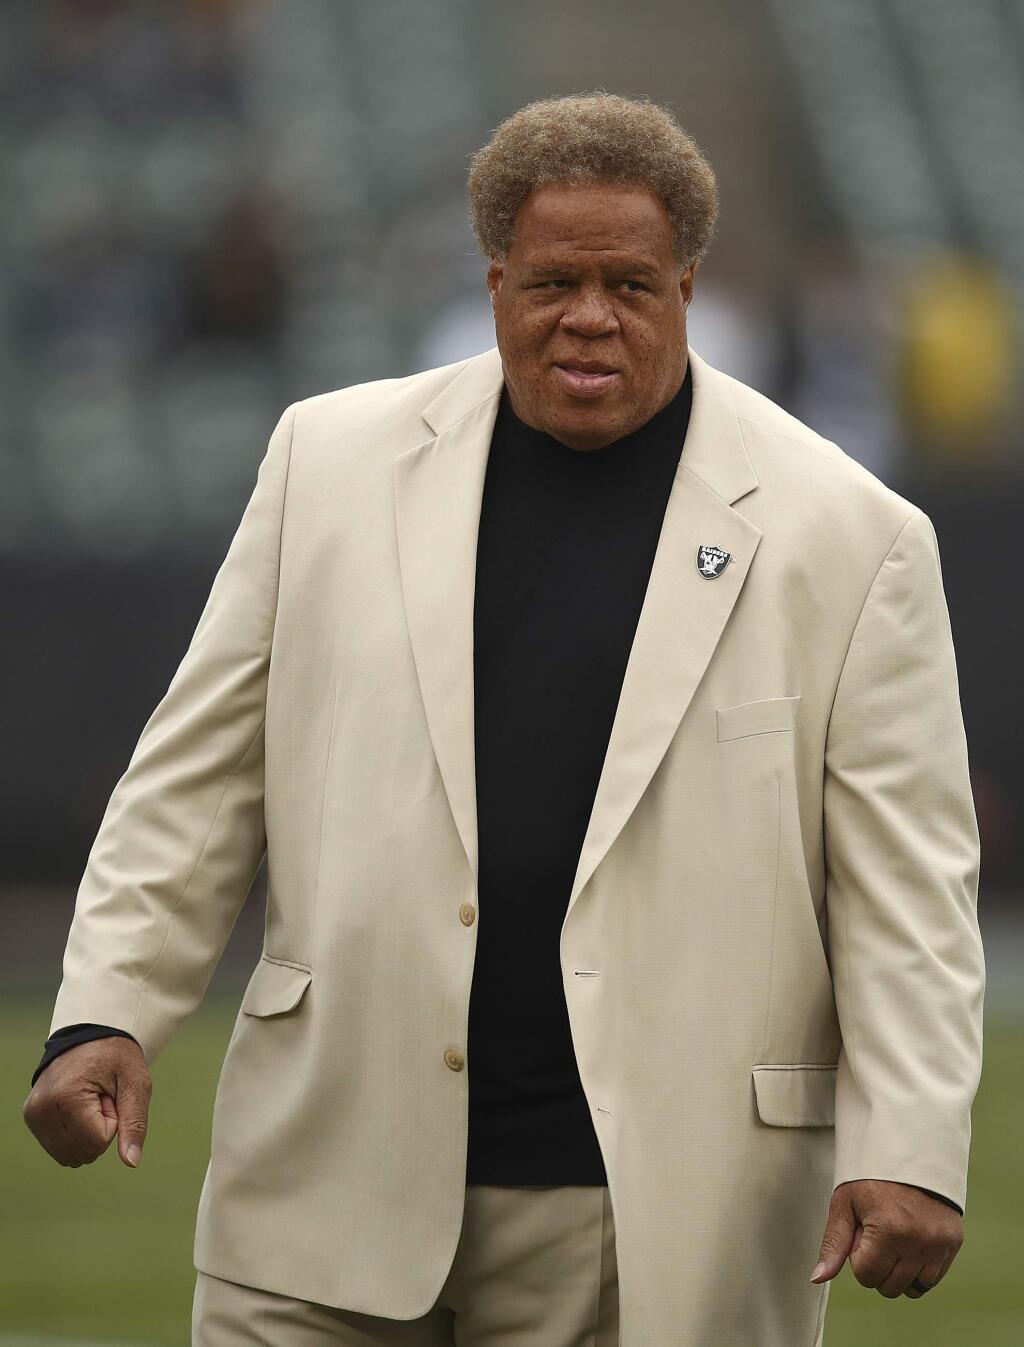 FILE - In this Dec. 9, 2018, file photo, Oakland Raiders general manager Reggie McKenzie stands on the field before an NFL football game between the Raiders and the Pittsburgh Steelers in Oakland, Calif. (AP Photo/Ben Margot, File)